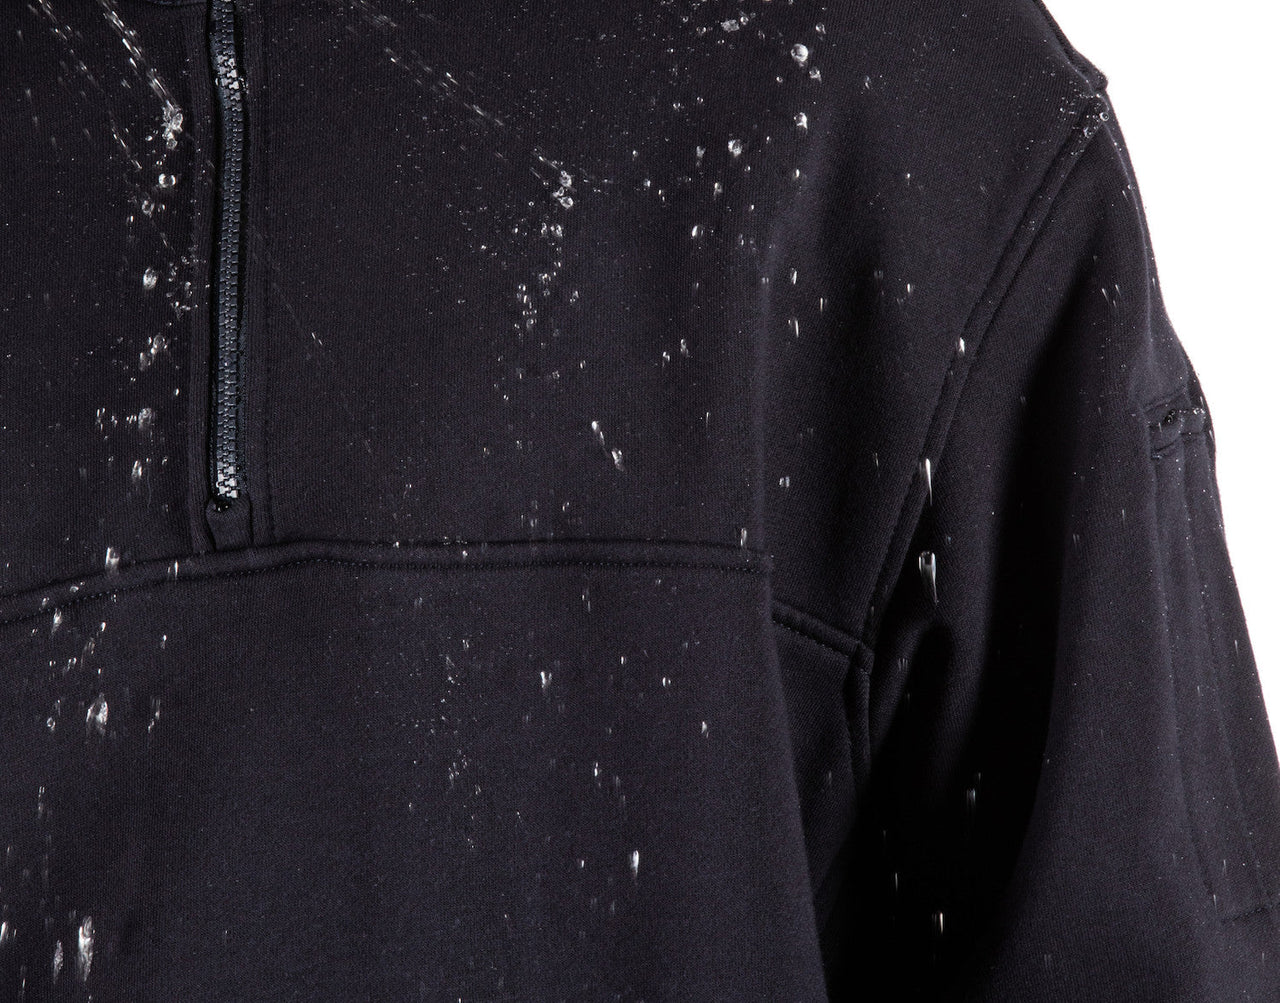 Pflugerville | 5.11 Water Repellent Job Shirt (72363) | The Fire Center | The Fire Store | Store | Fuego Fire Center | Designed to provide superior precipitation and liquid protection while remaining breathable and lightweight, the Water Repellant Job Shirt from 5.11® is crafted from genuine Storm Cotton®, giving you an ideal blend of comfort and all-weather performance.